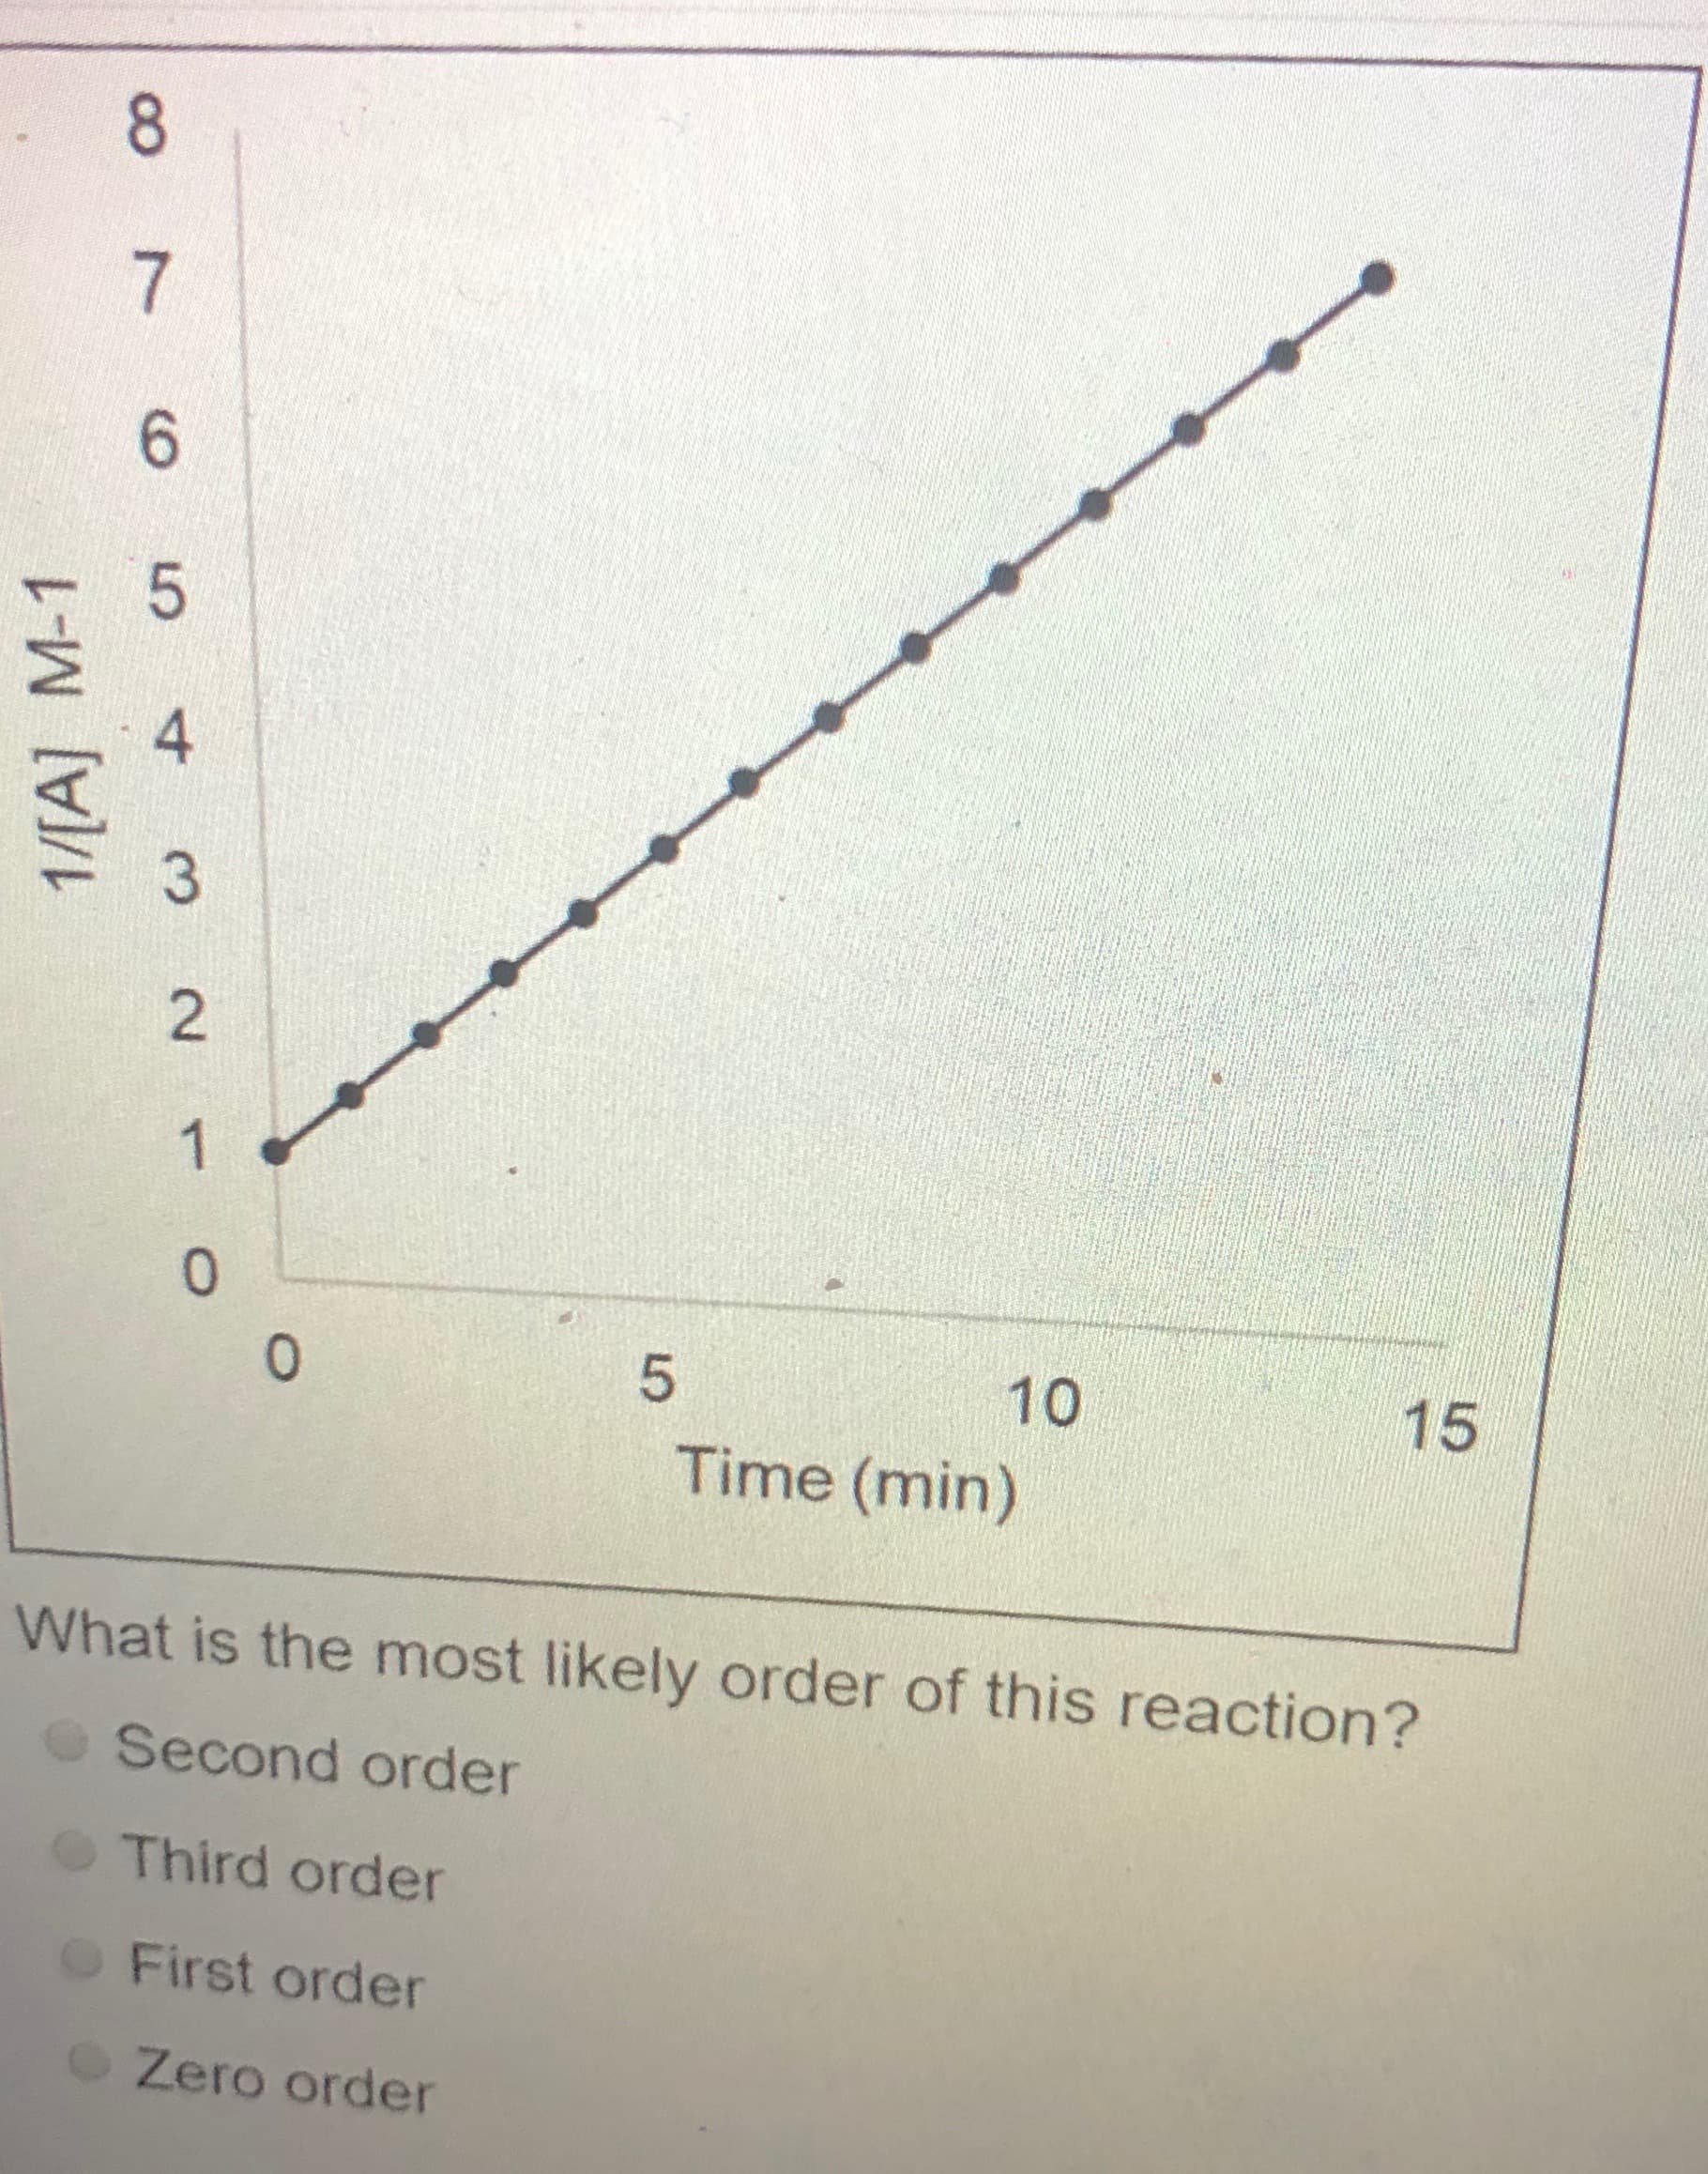 What is the most likely order of this reaction?
Second order
Third order
